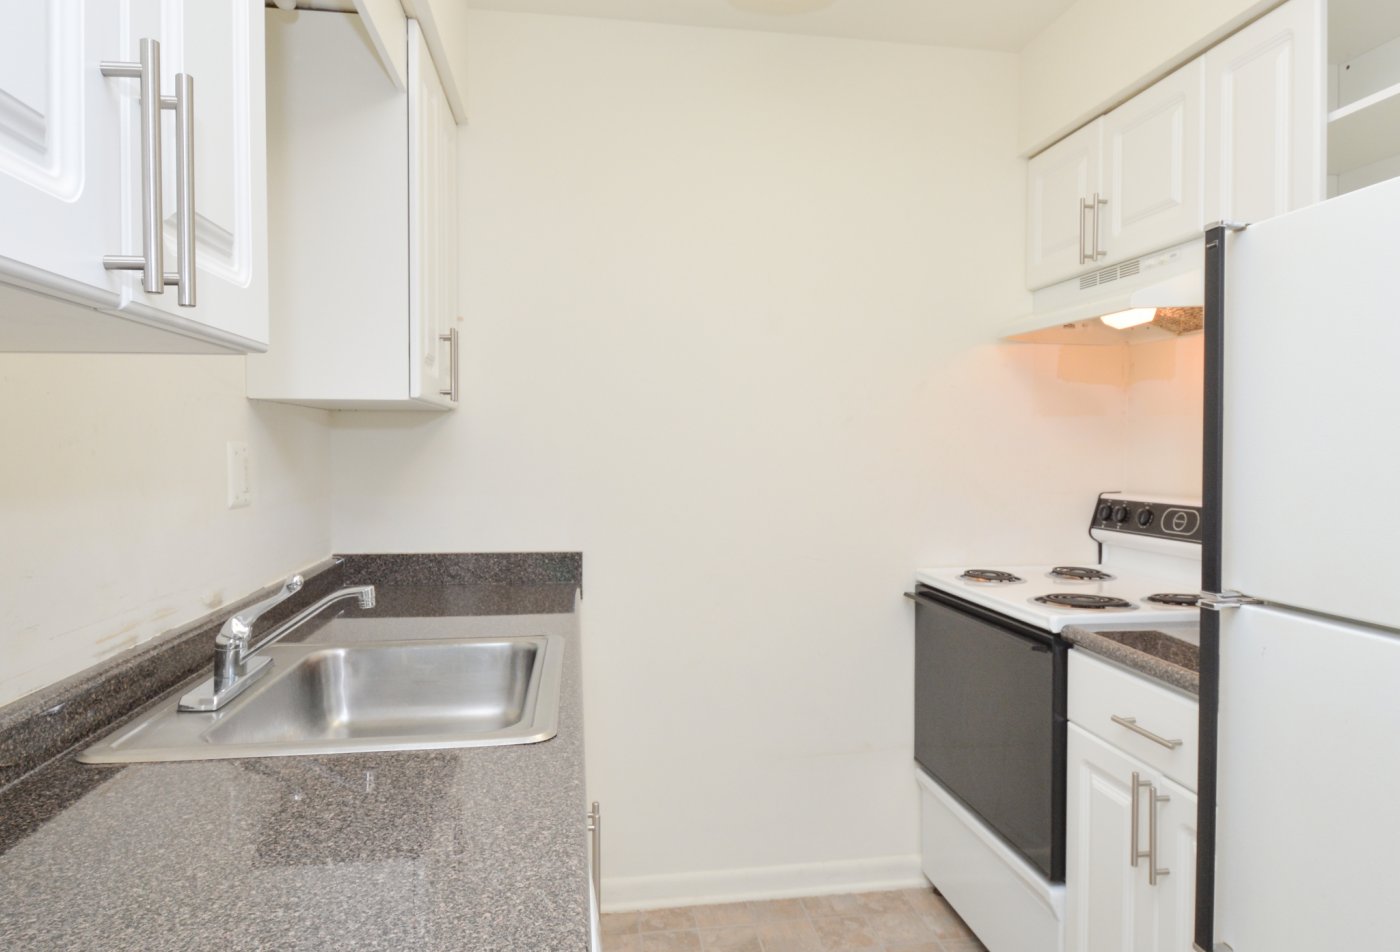 State-of-the-Art Kitchen | Boothwyn PA Apartment Homes | Rolling Glen Townhomes and Apartments